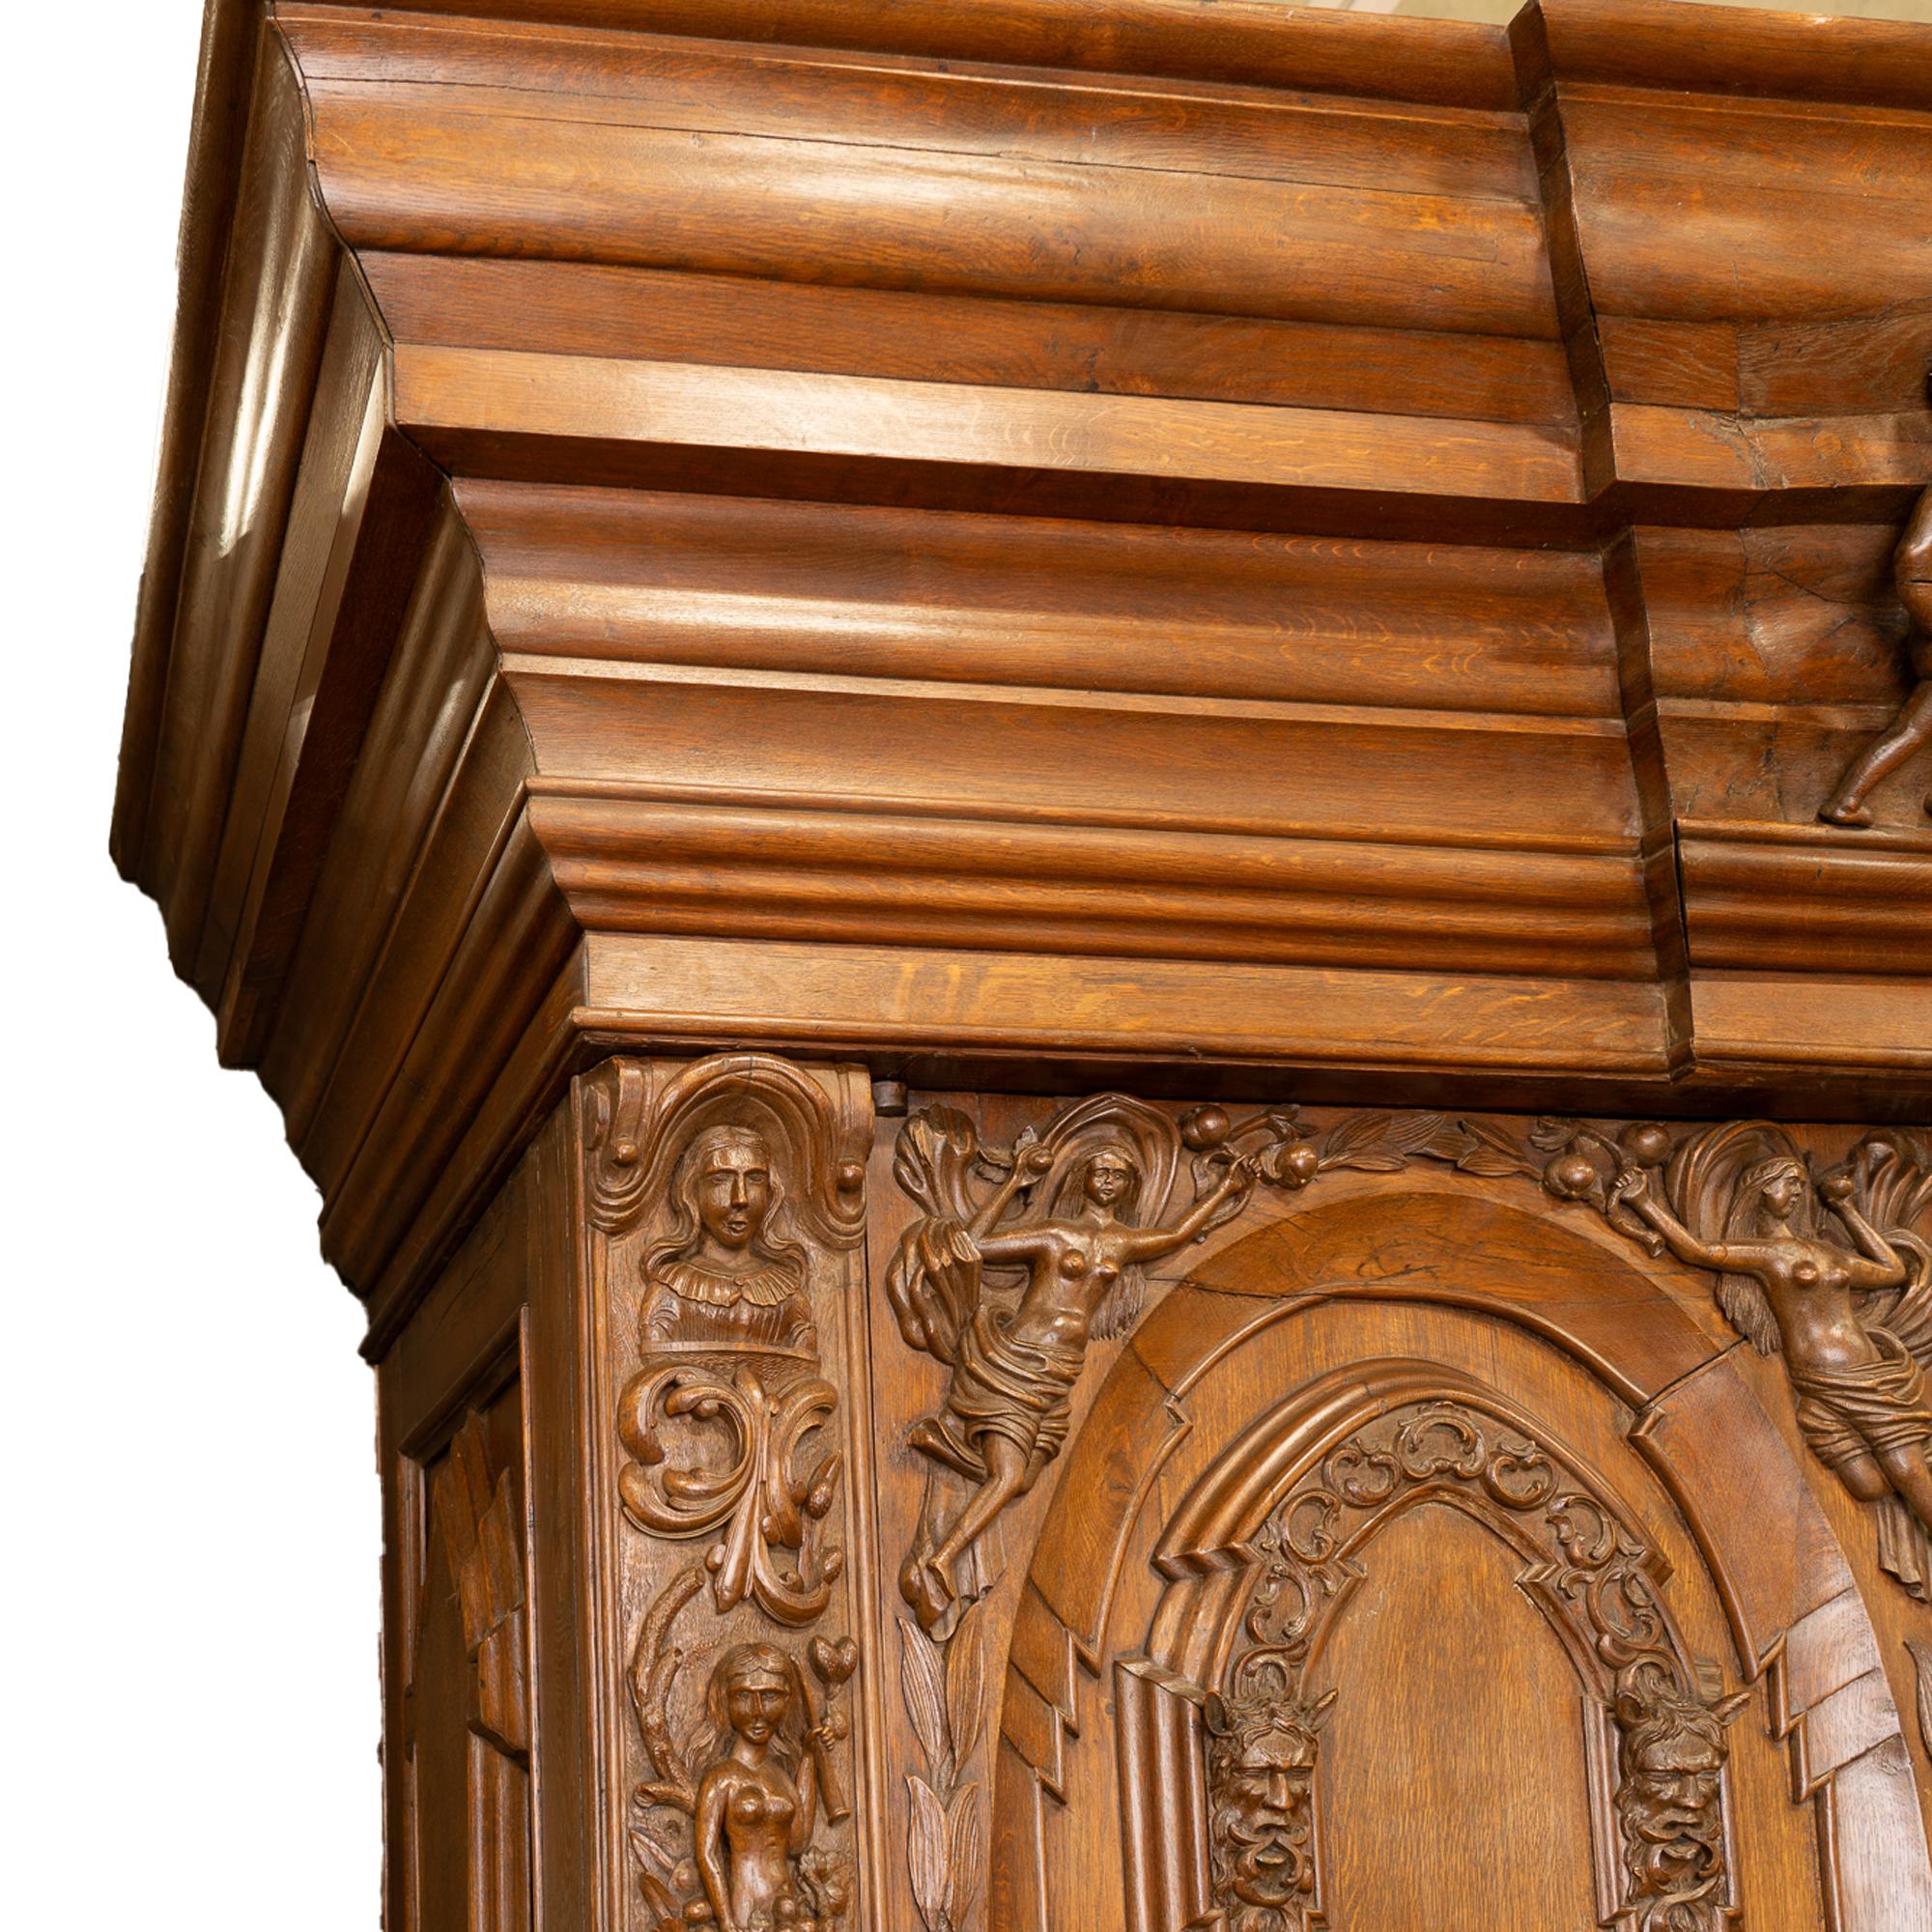 Large Heavily Carved Oak Armoire With Wrangel Family Crest, Sweden circa 1740-80 For Sale 1